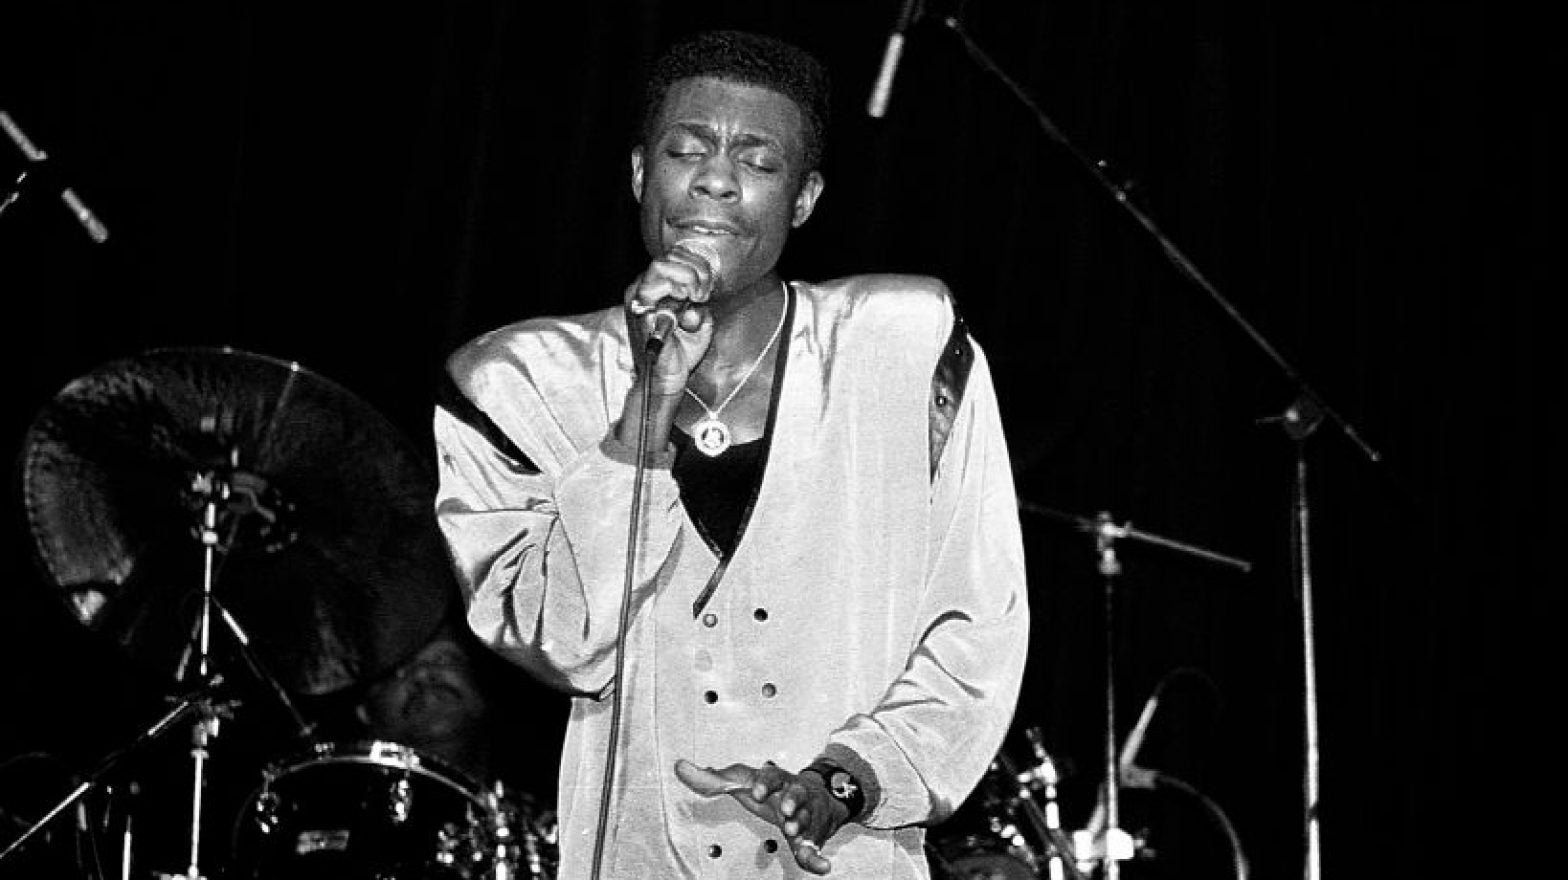 20 Keith Sweat Jams We're Waiting To Hear During His Essence Fest VERZUZ Battle Against Bobby Brown